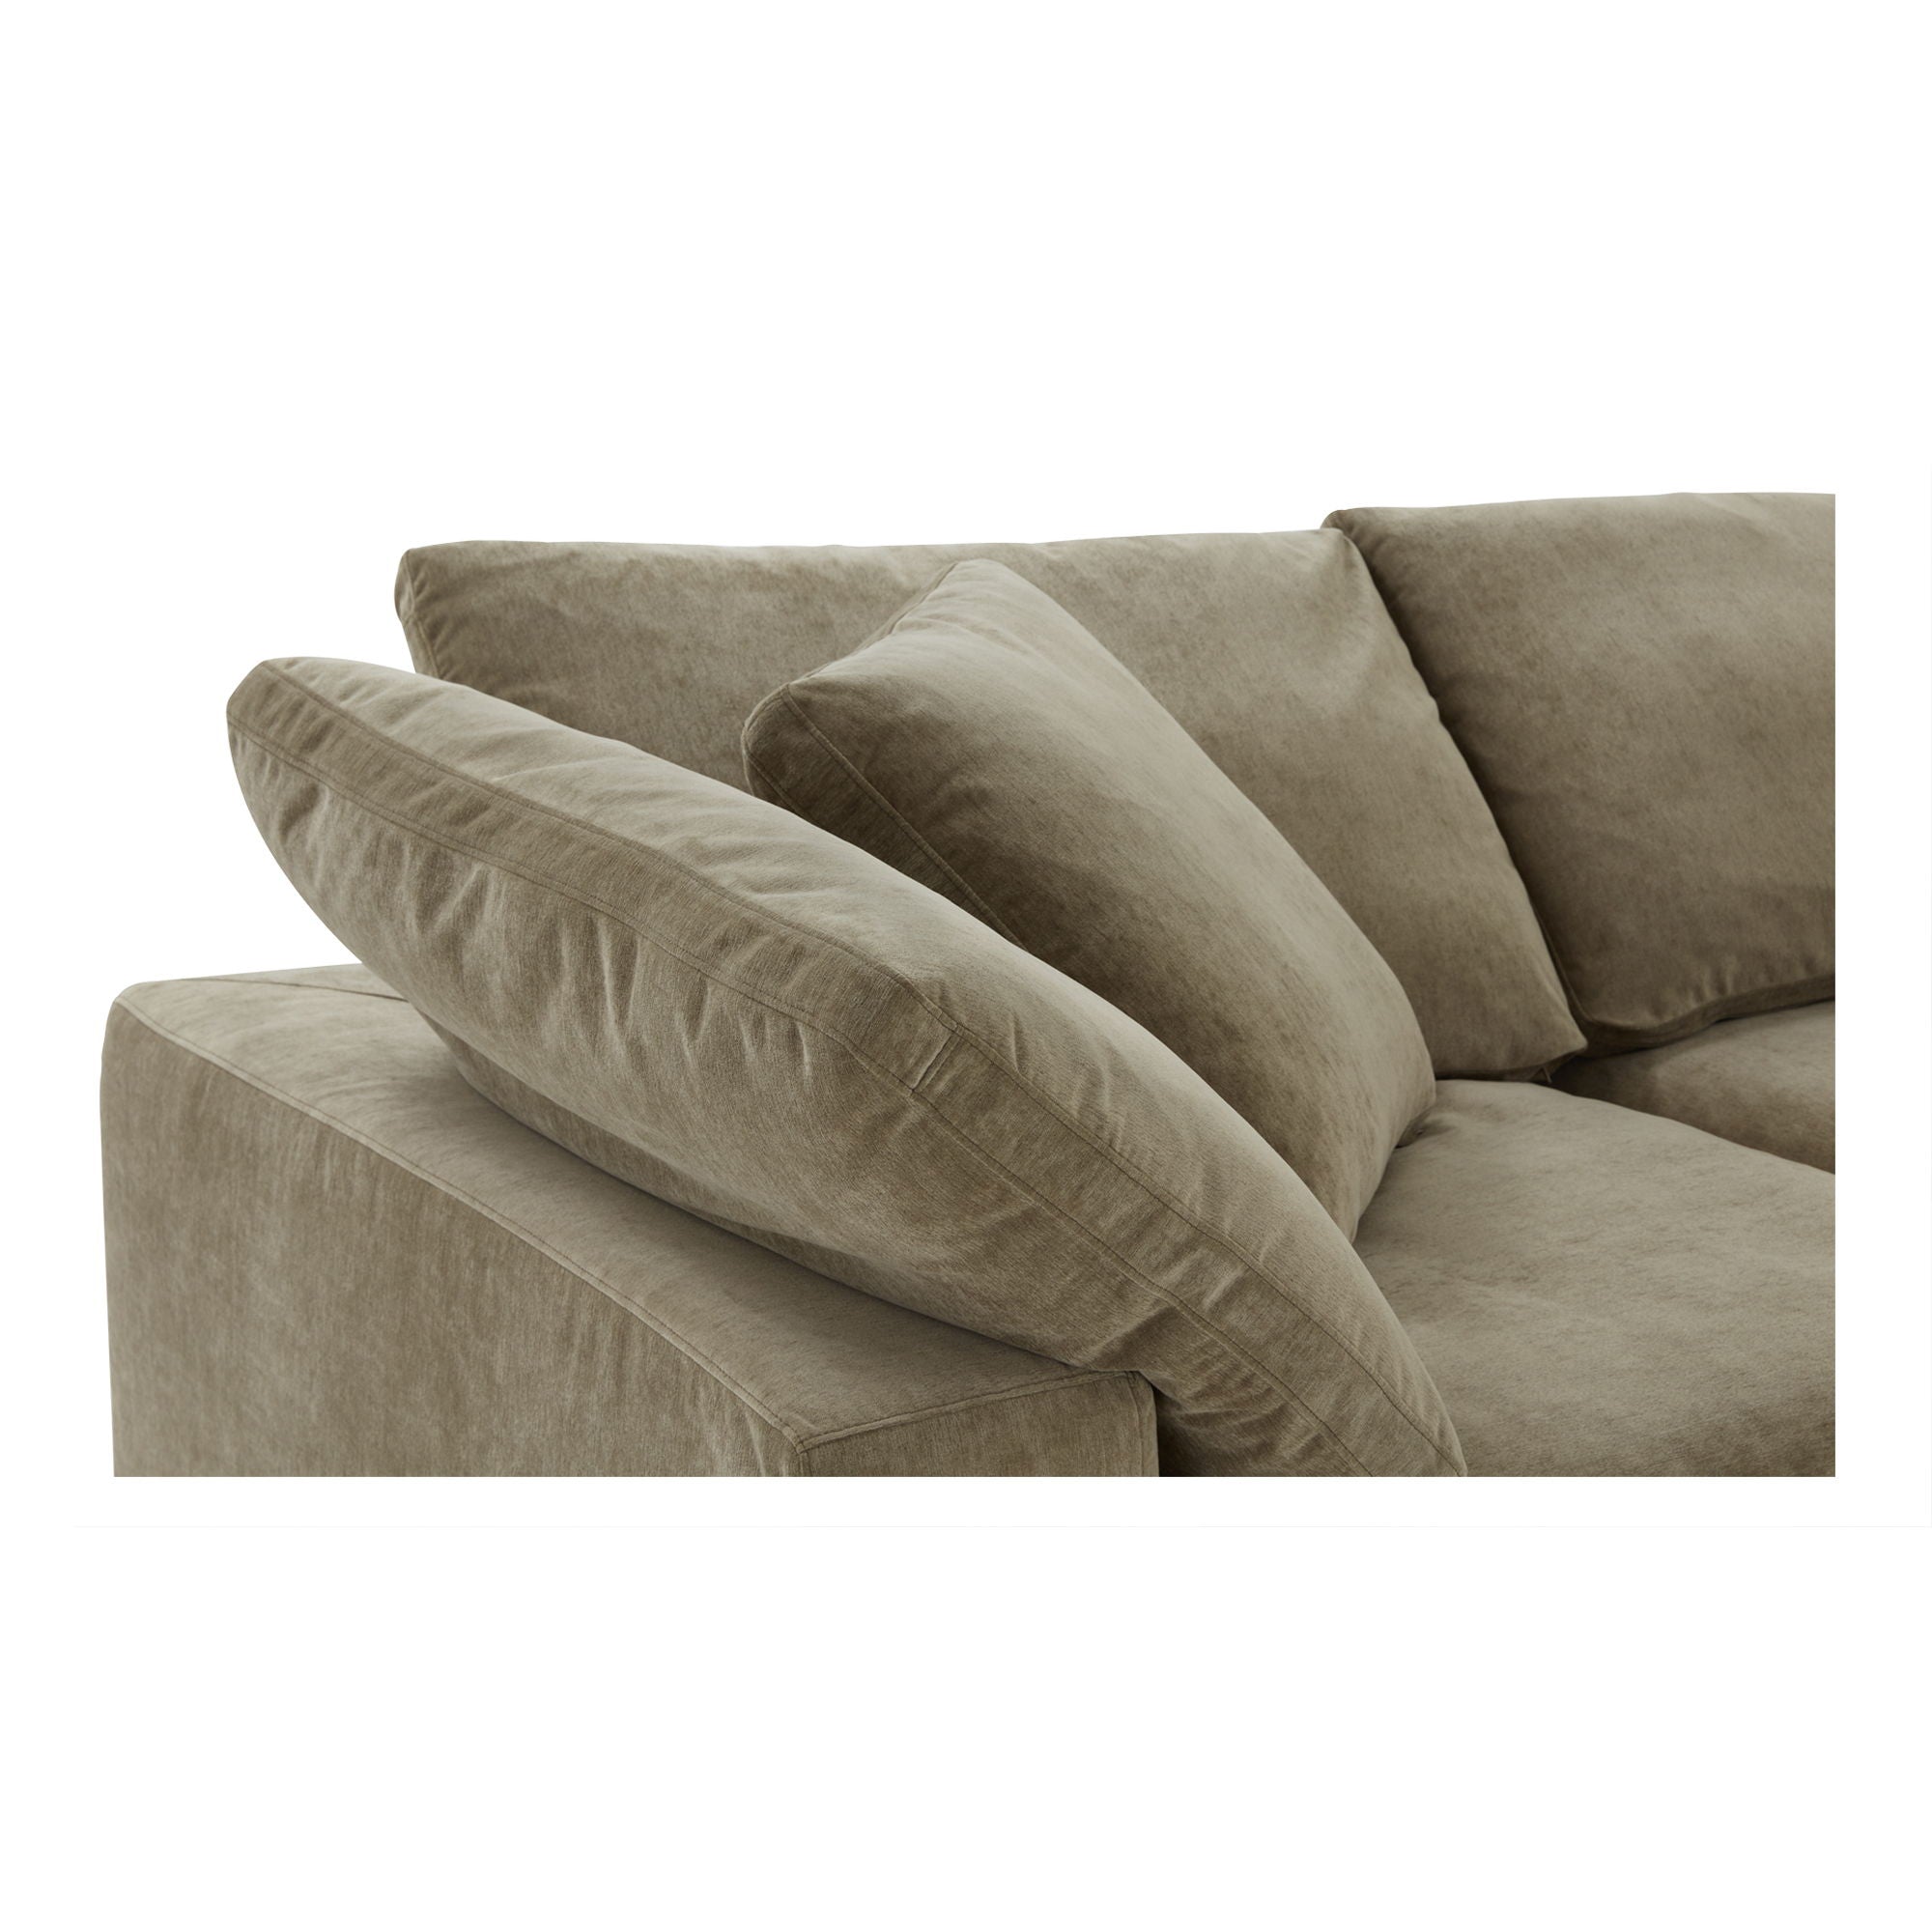 Terra Nook Modular Sectional - Desert Sage - Stain-Resistant-Stationary Sectionals-American Furniture Outlet